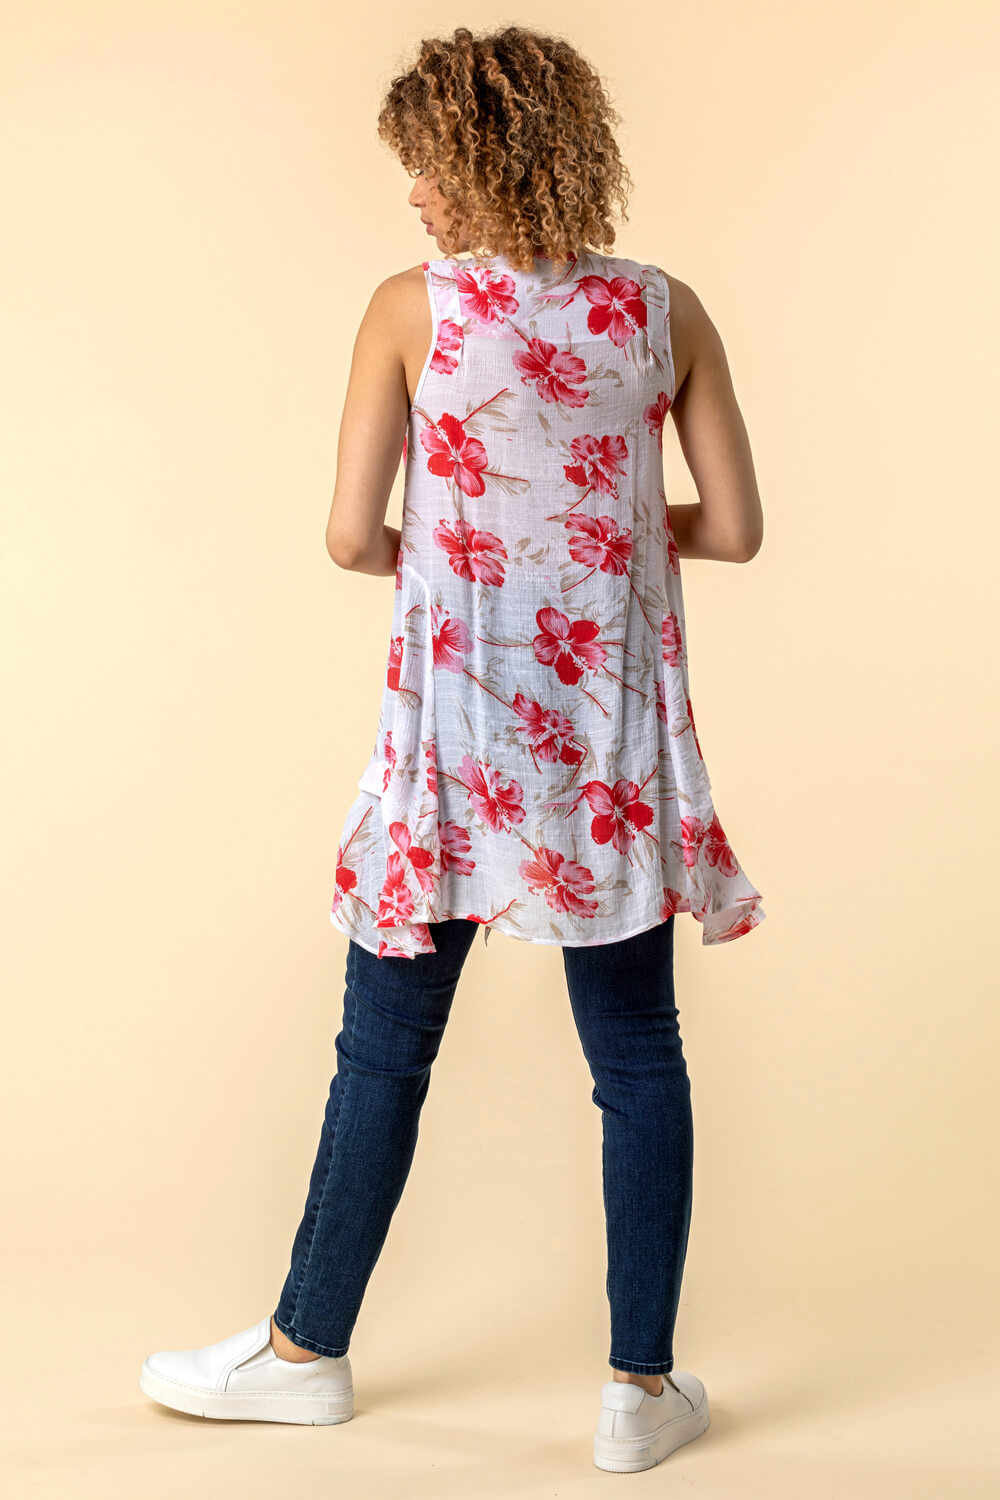 Red Floral Print Crinkle Tunic Top, Image 2 of 4